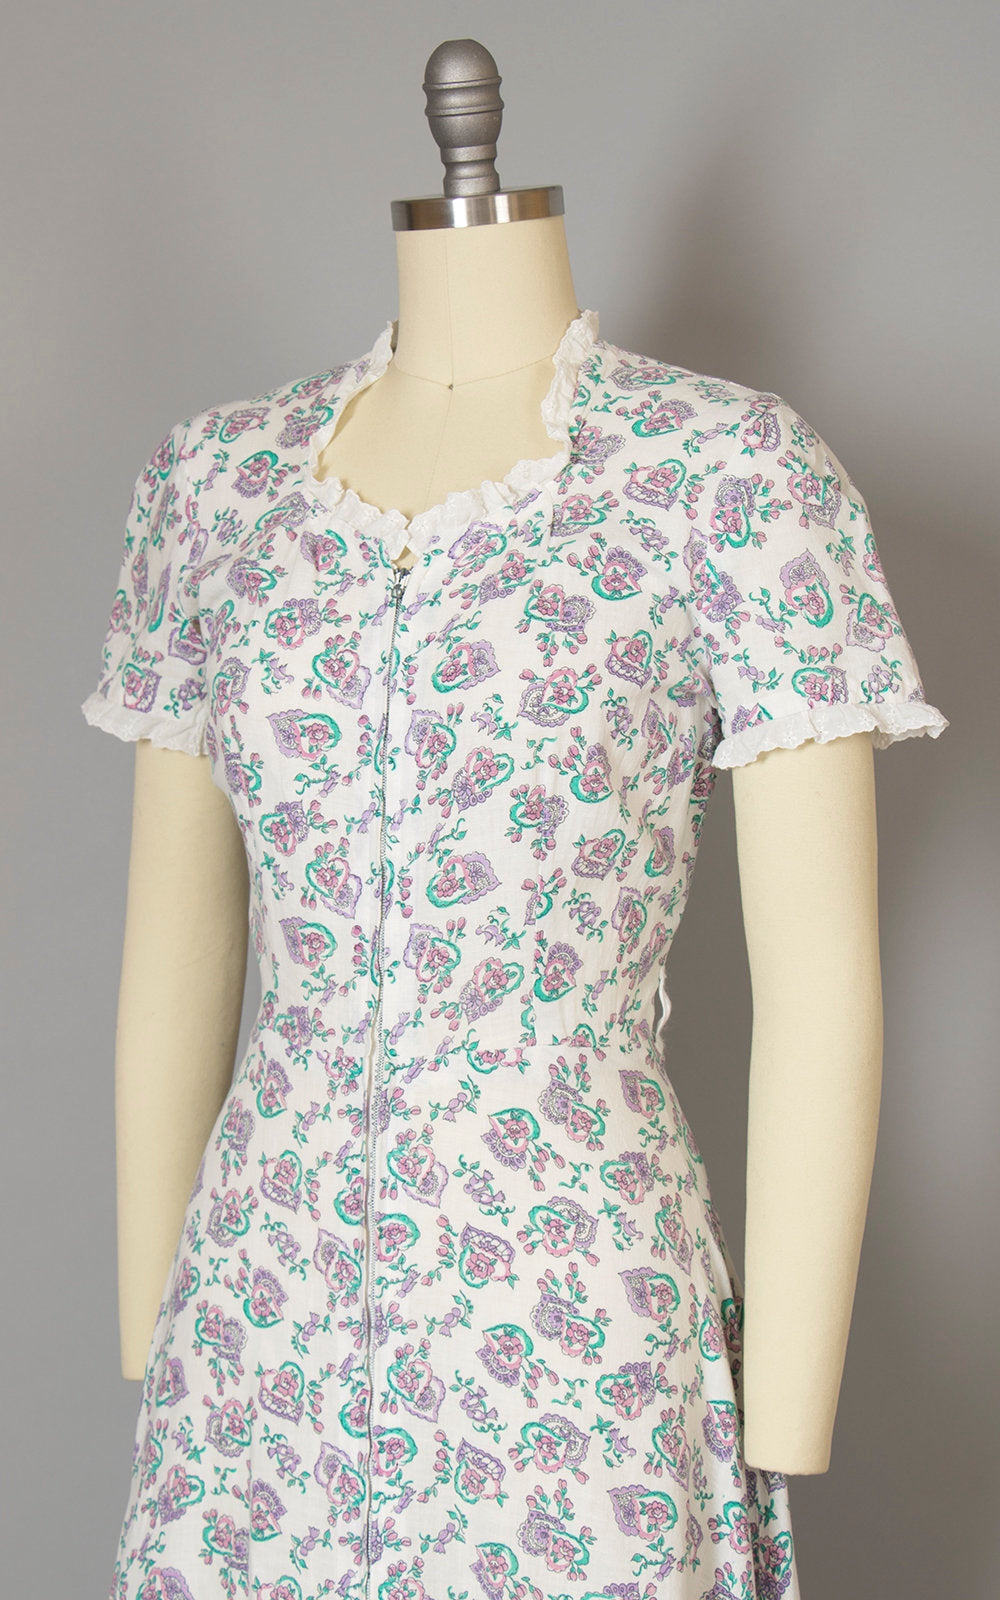 Vintage 1940s Dress | 40s Hearts Floral Novelty Print Cotton White Lace Zip Front Maxi House Dress (small)